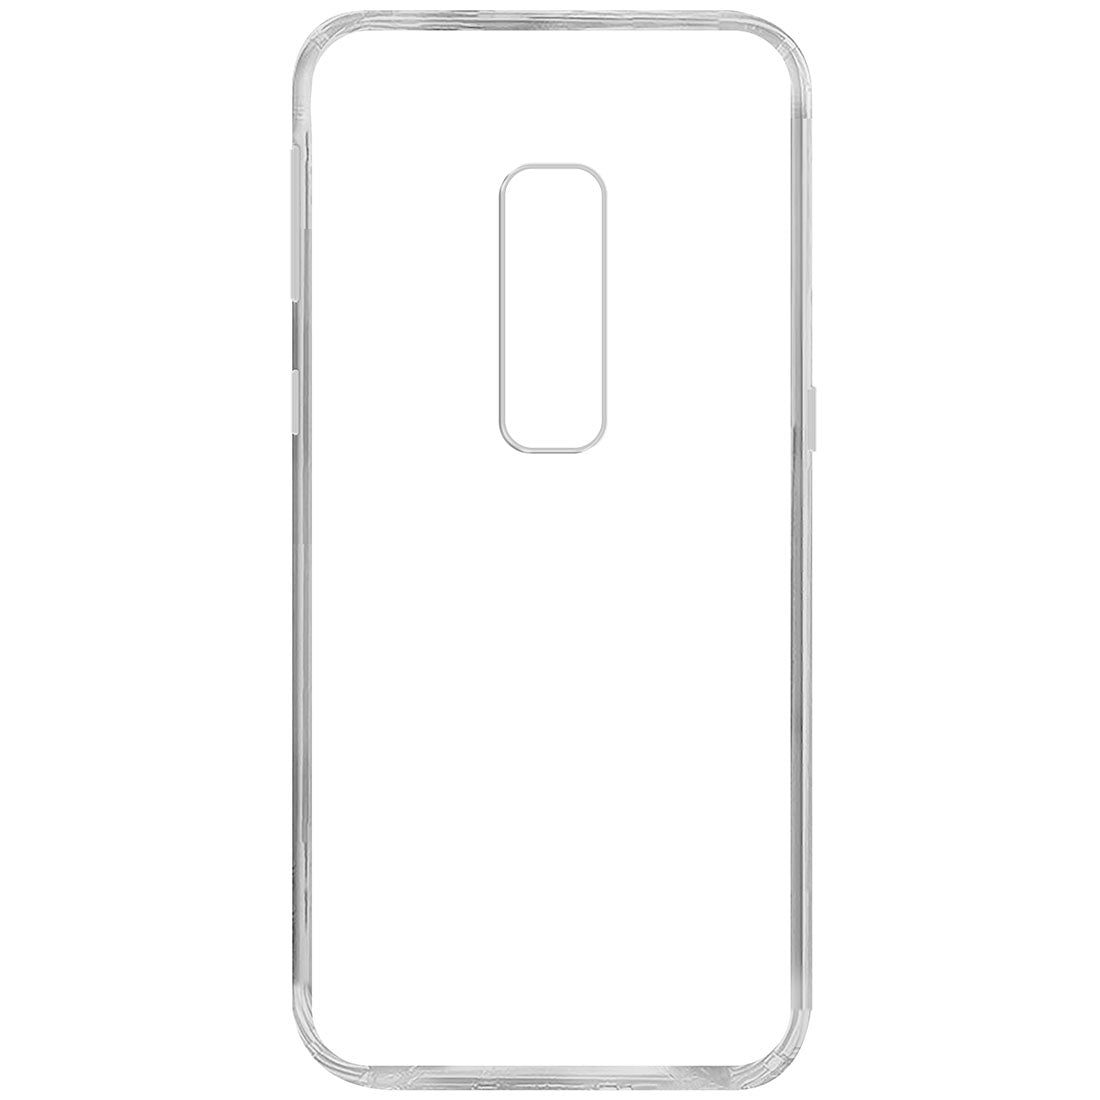 Clear Case for Lenovo K10 Note